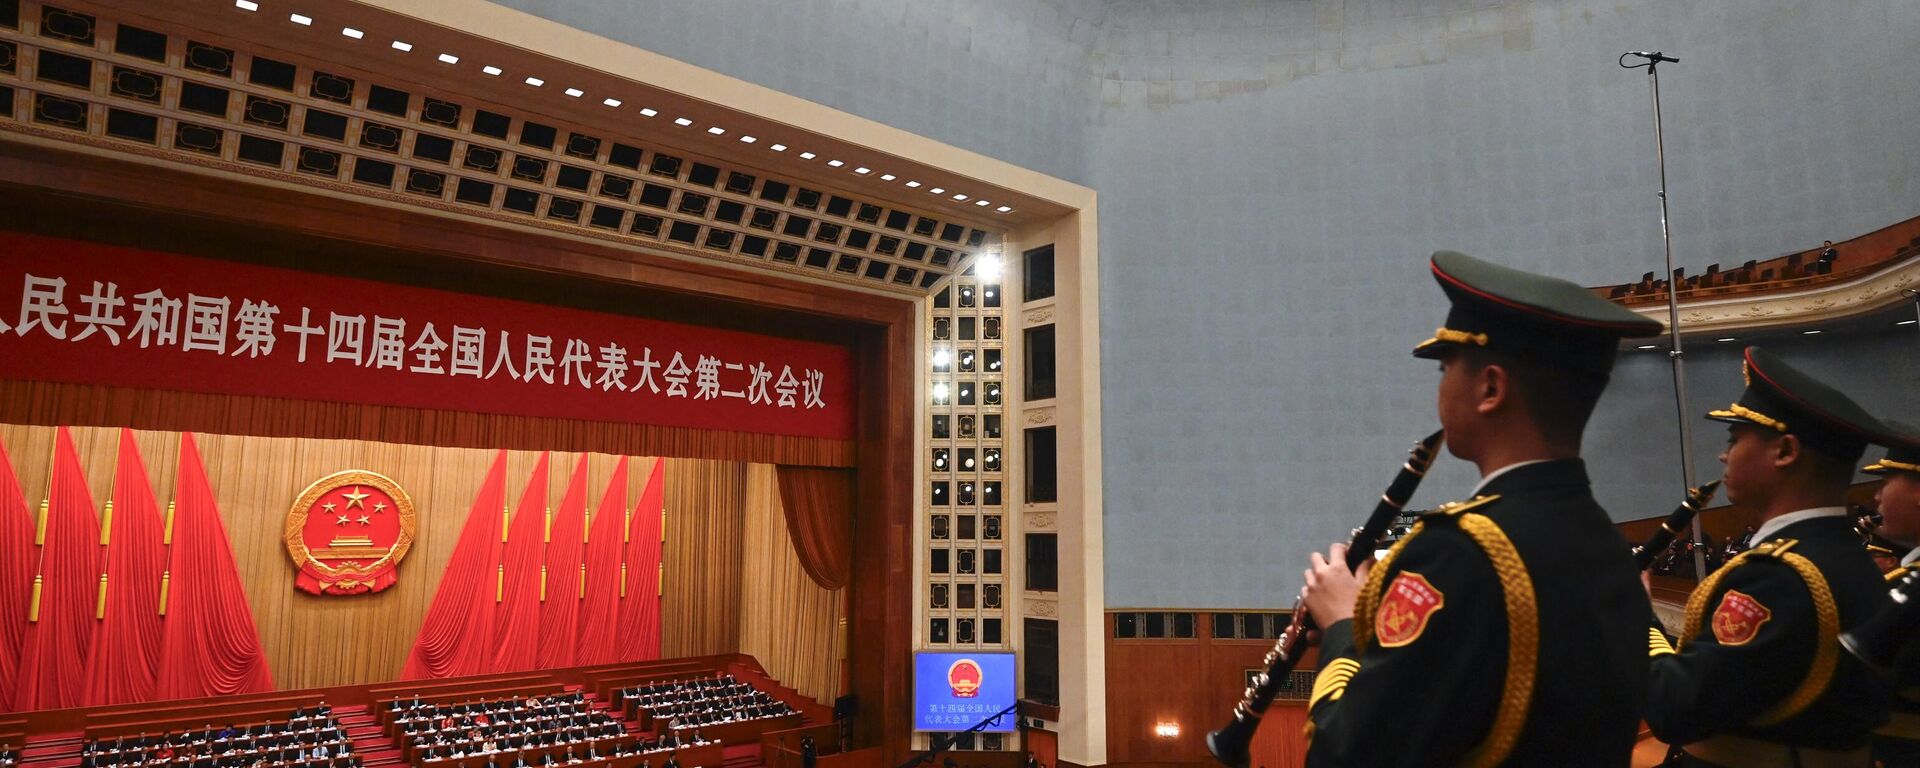 The People's Liberation Army (PLA) band performs during the opening session of the National People's Congress (NPC) at the Great Hall of the People in Beijing on March 5, 2024. - Sputnik International, 1920, 05.03.2024